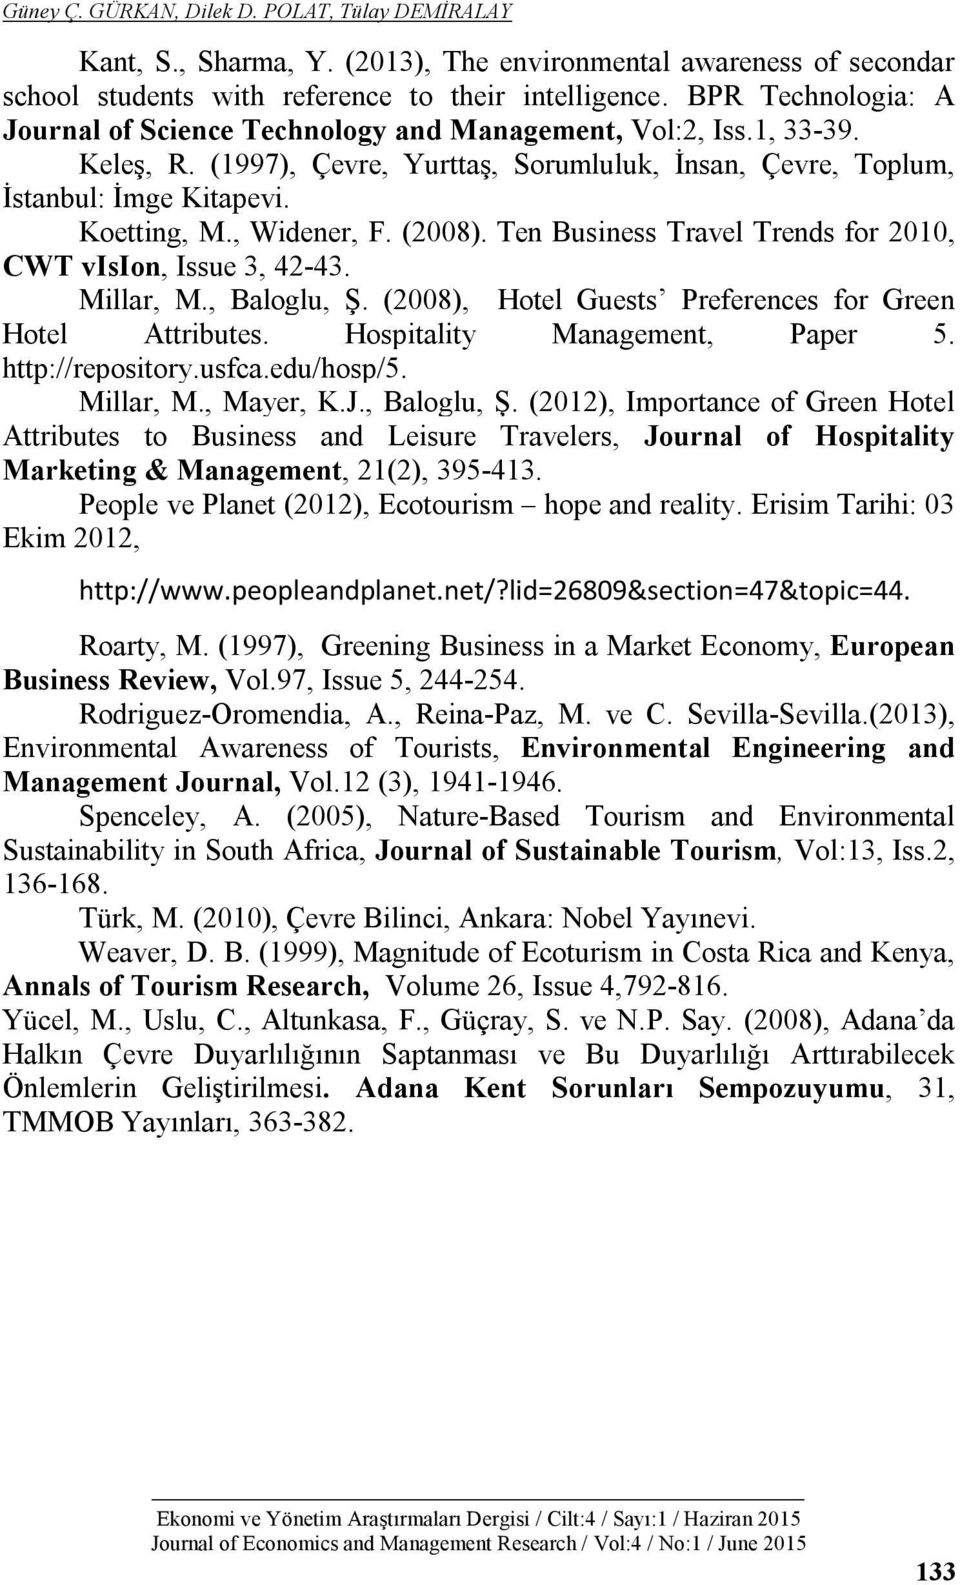 , Widener, F. (2008). Ten Business Travel Trends for 2010, CWT vision, Issue 3, 42-43. Millar, M., Baloglu, Ş. (2008), Hotel Guests Preferences for Green Hotel Attributes.